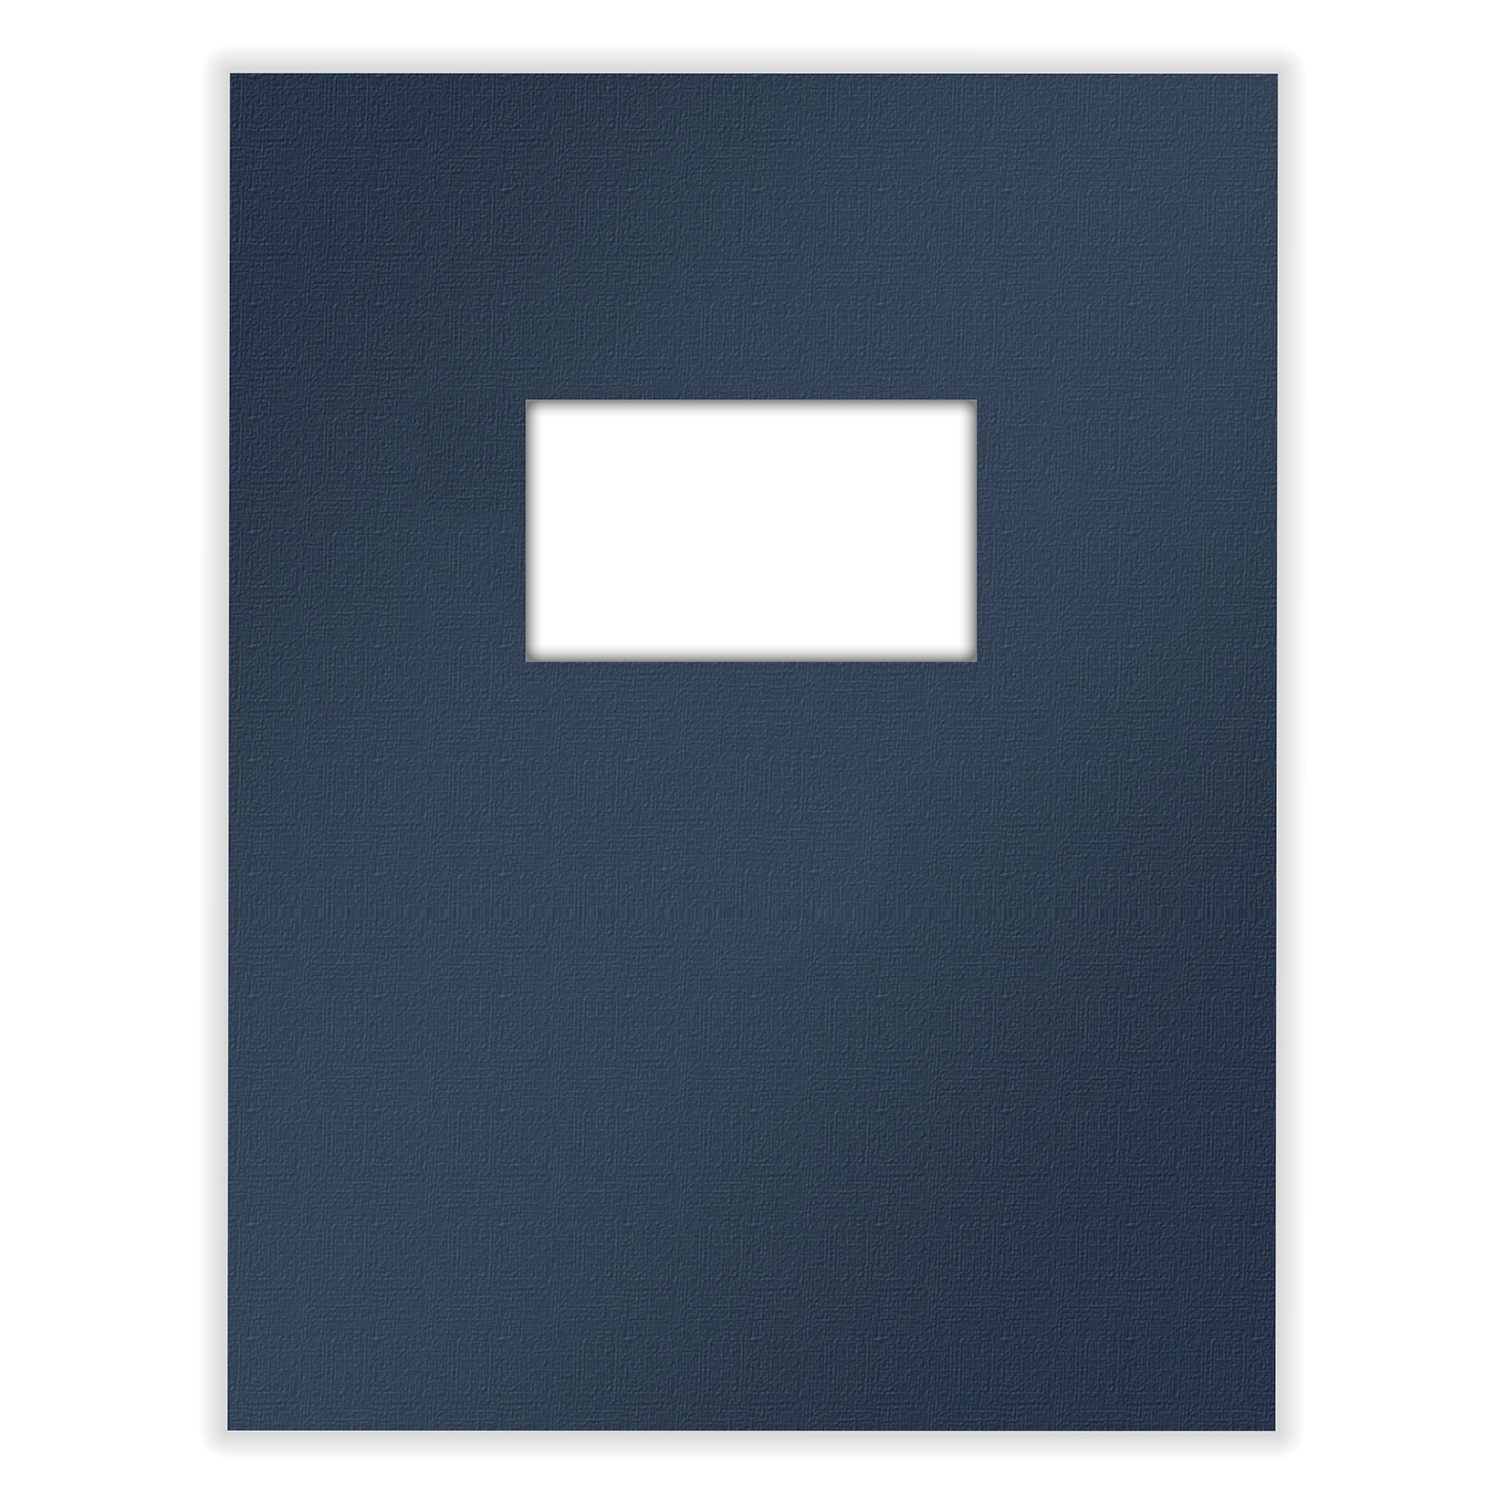 Picture of Tax Presentation Folder, Two Piece Report Cover, Single Window, Navy Blue, 8-1/2" x 11", Pack of 50